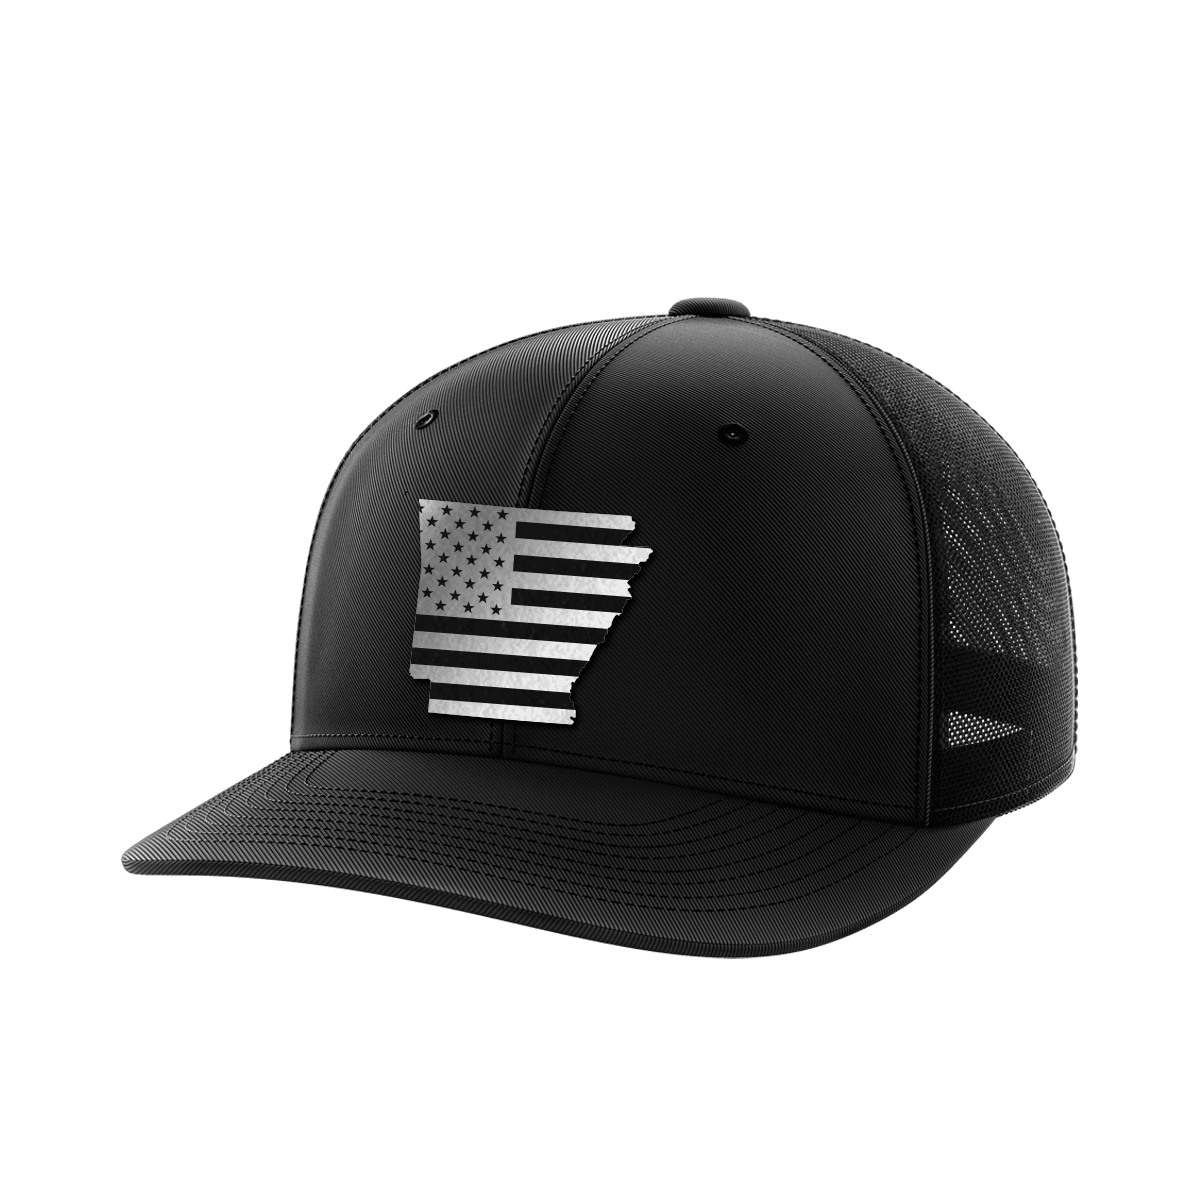 Arkansas United Collection (black leather) - Greater Half